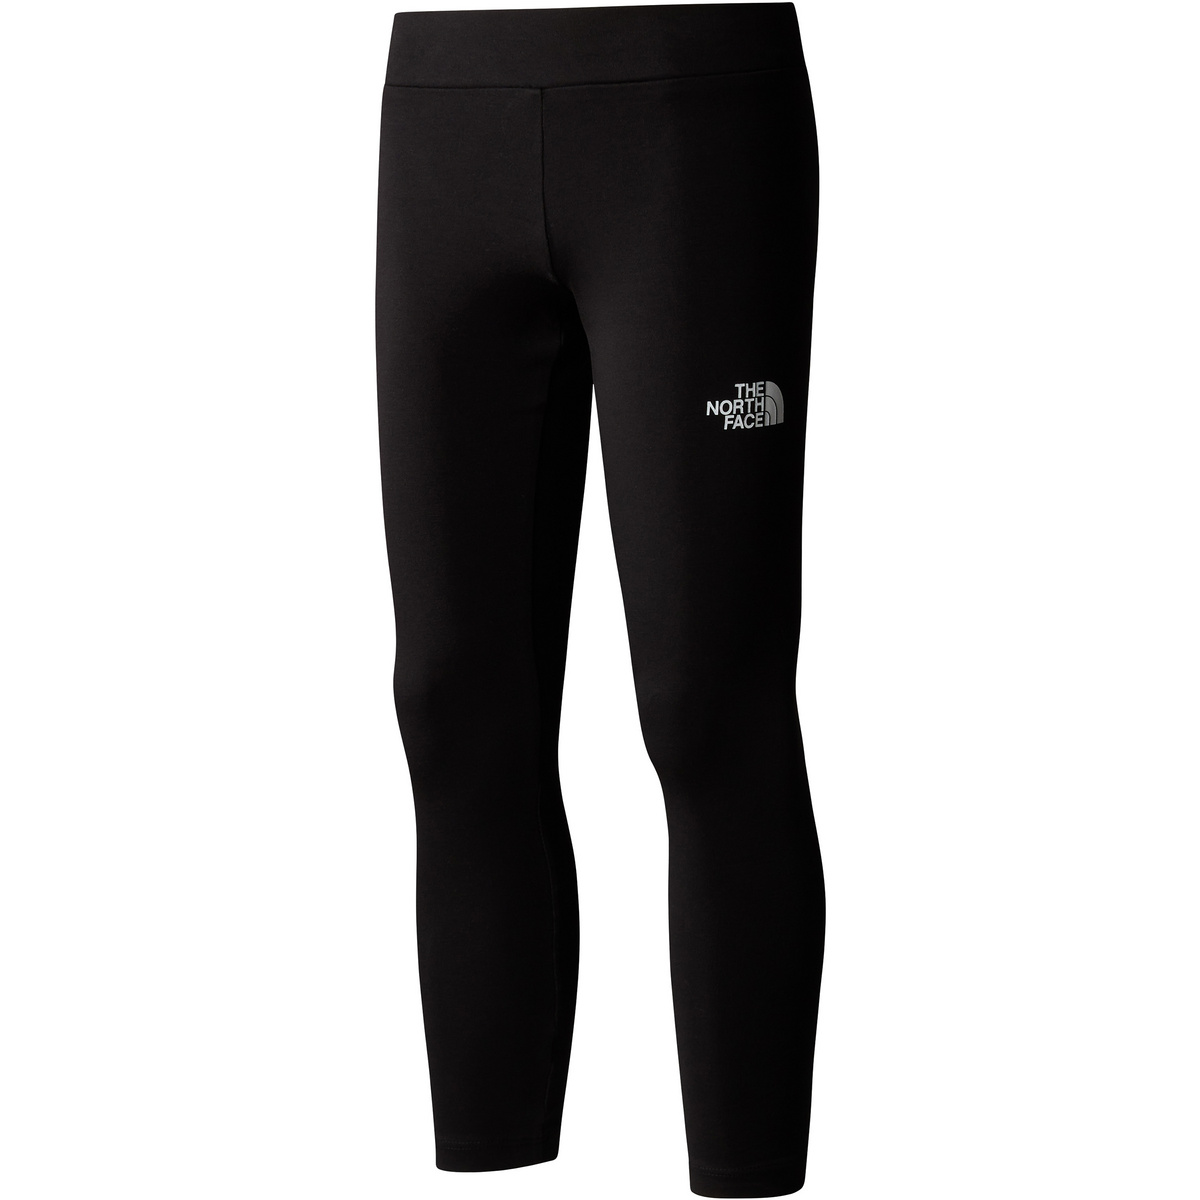 Image of The North Face Bambino Leggings G Graphic